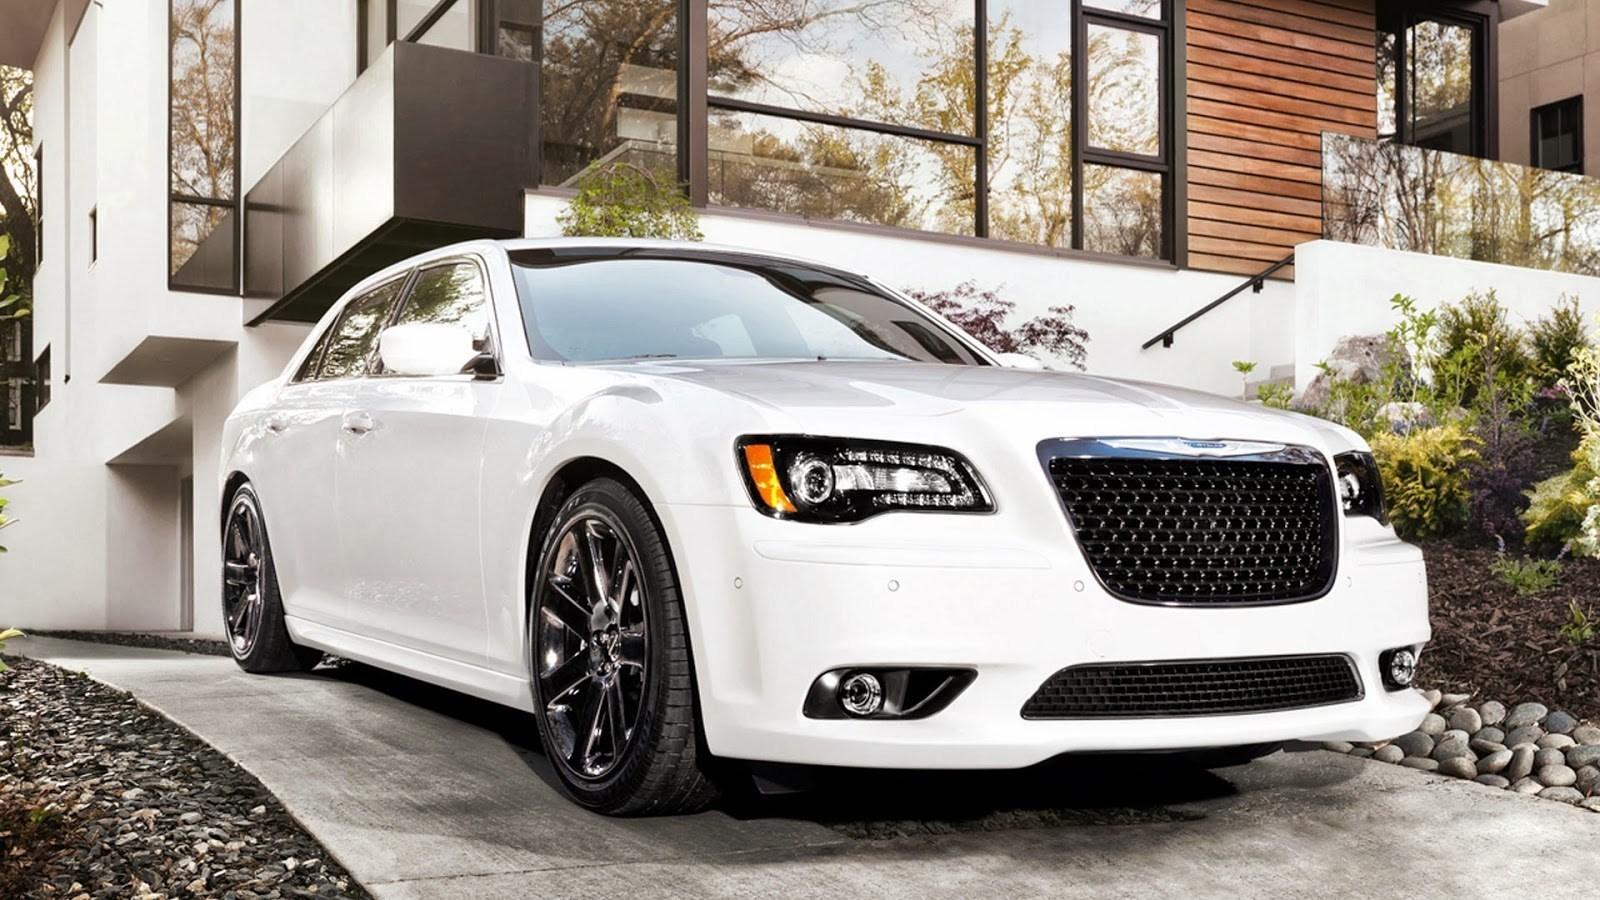 Chrysler 300 Wallpaper HD Photo Wallpaper And Other Image